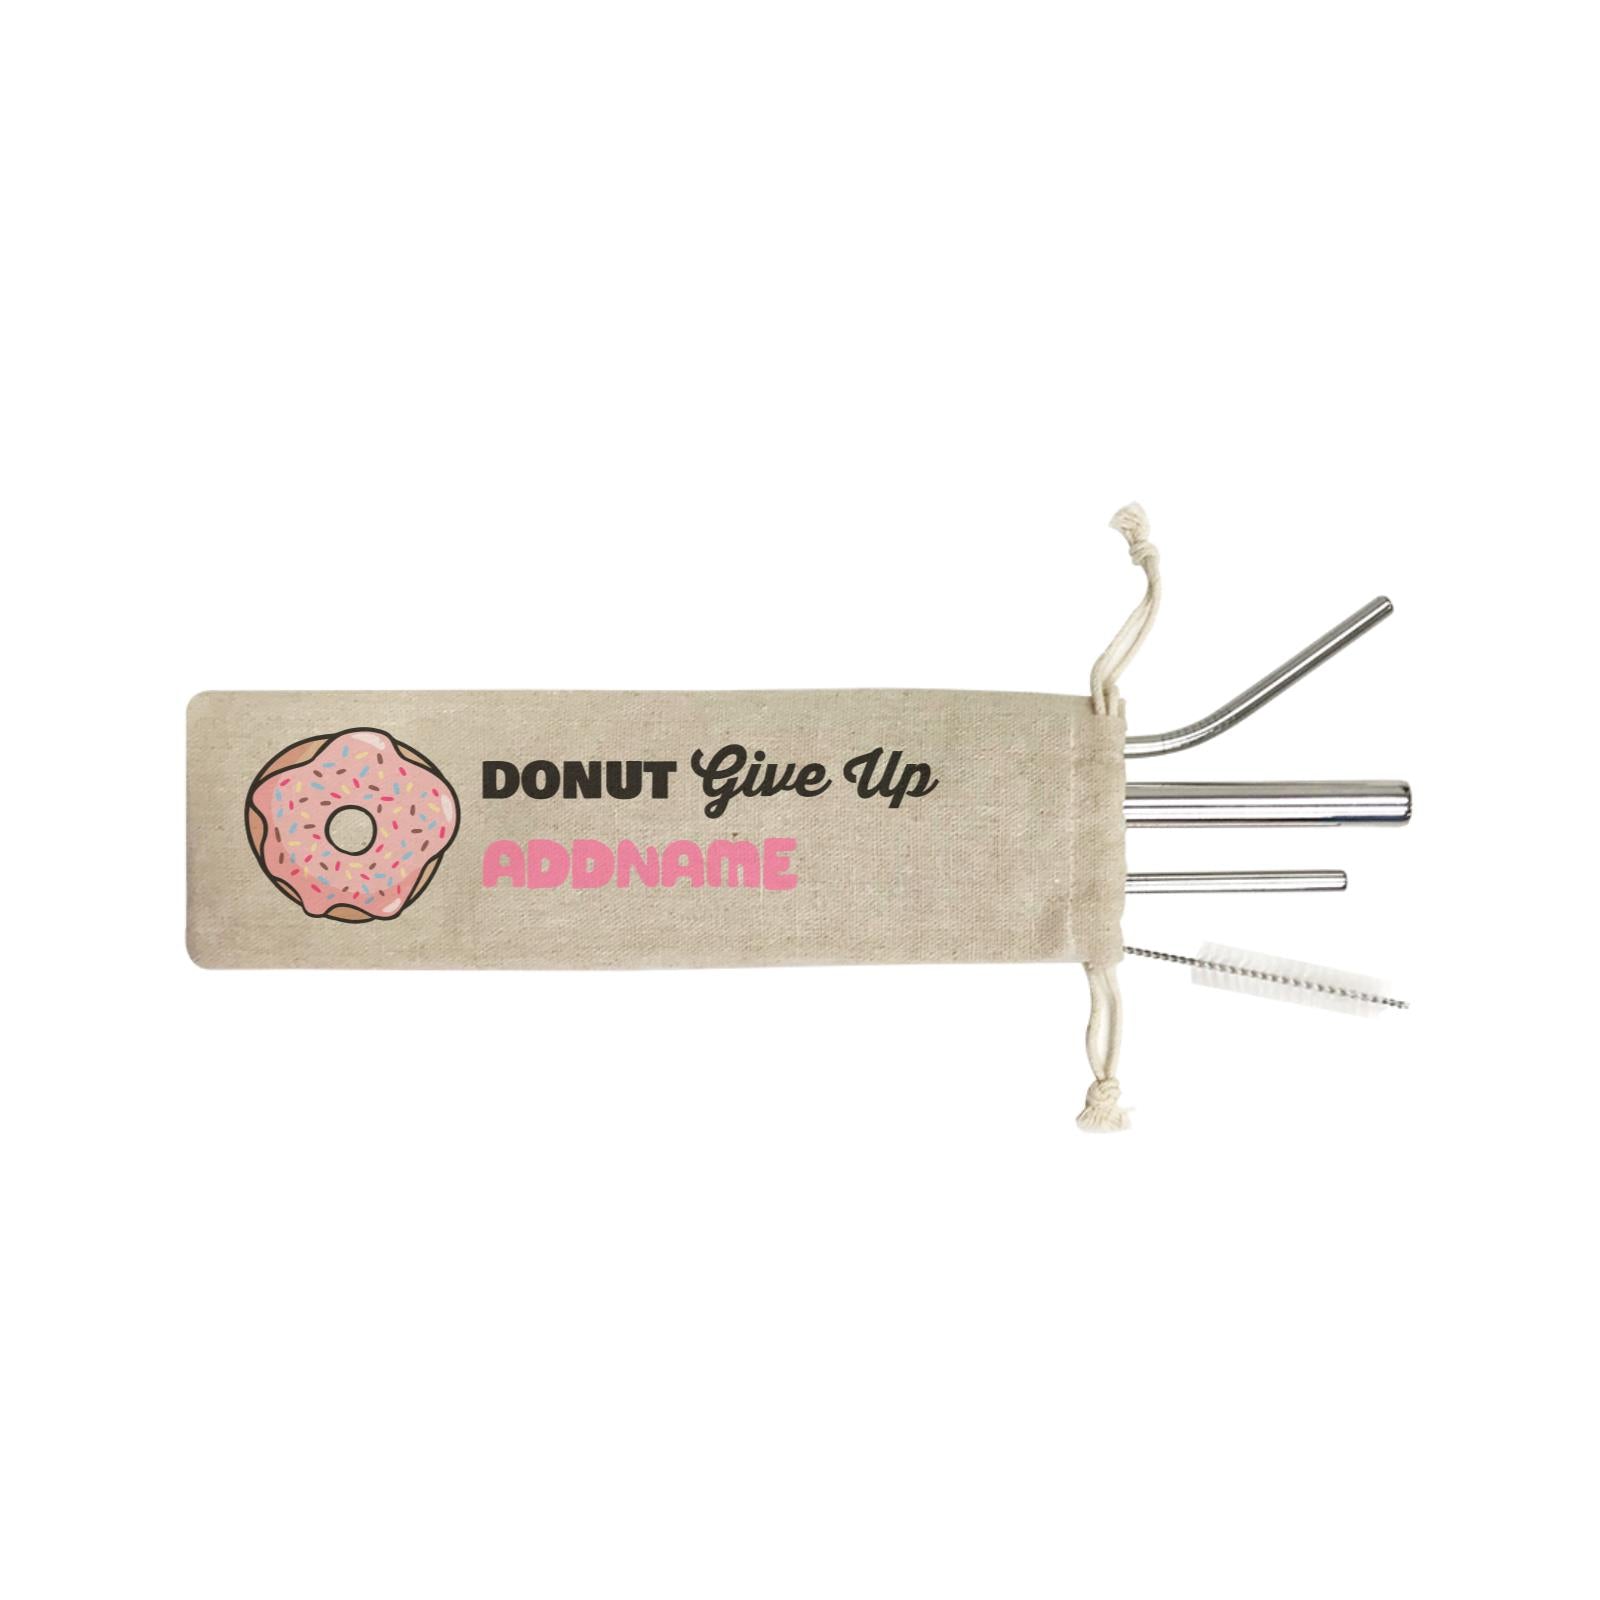 Donuts Quotes Donut Give Up Addname SB 4-in-1 Stainless Steel Straw Set In a Satchel